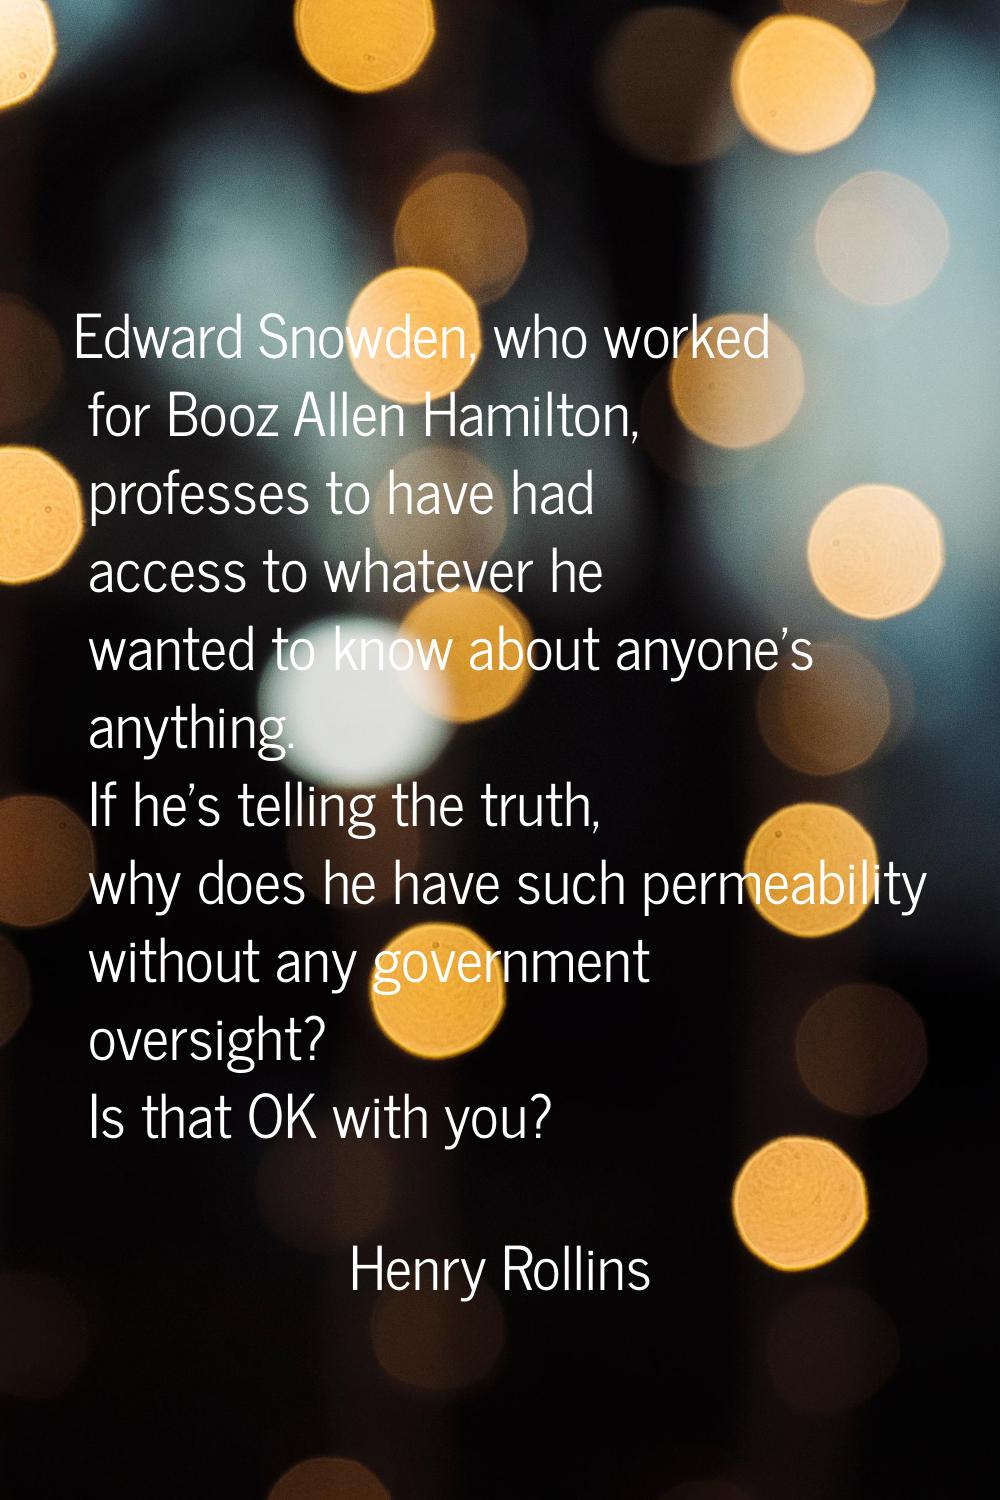 Edward Snowden, who worked for Booz Allen Hamilton, professes to have had access to whatever he wan